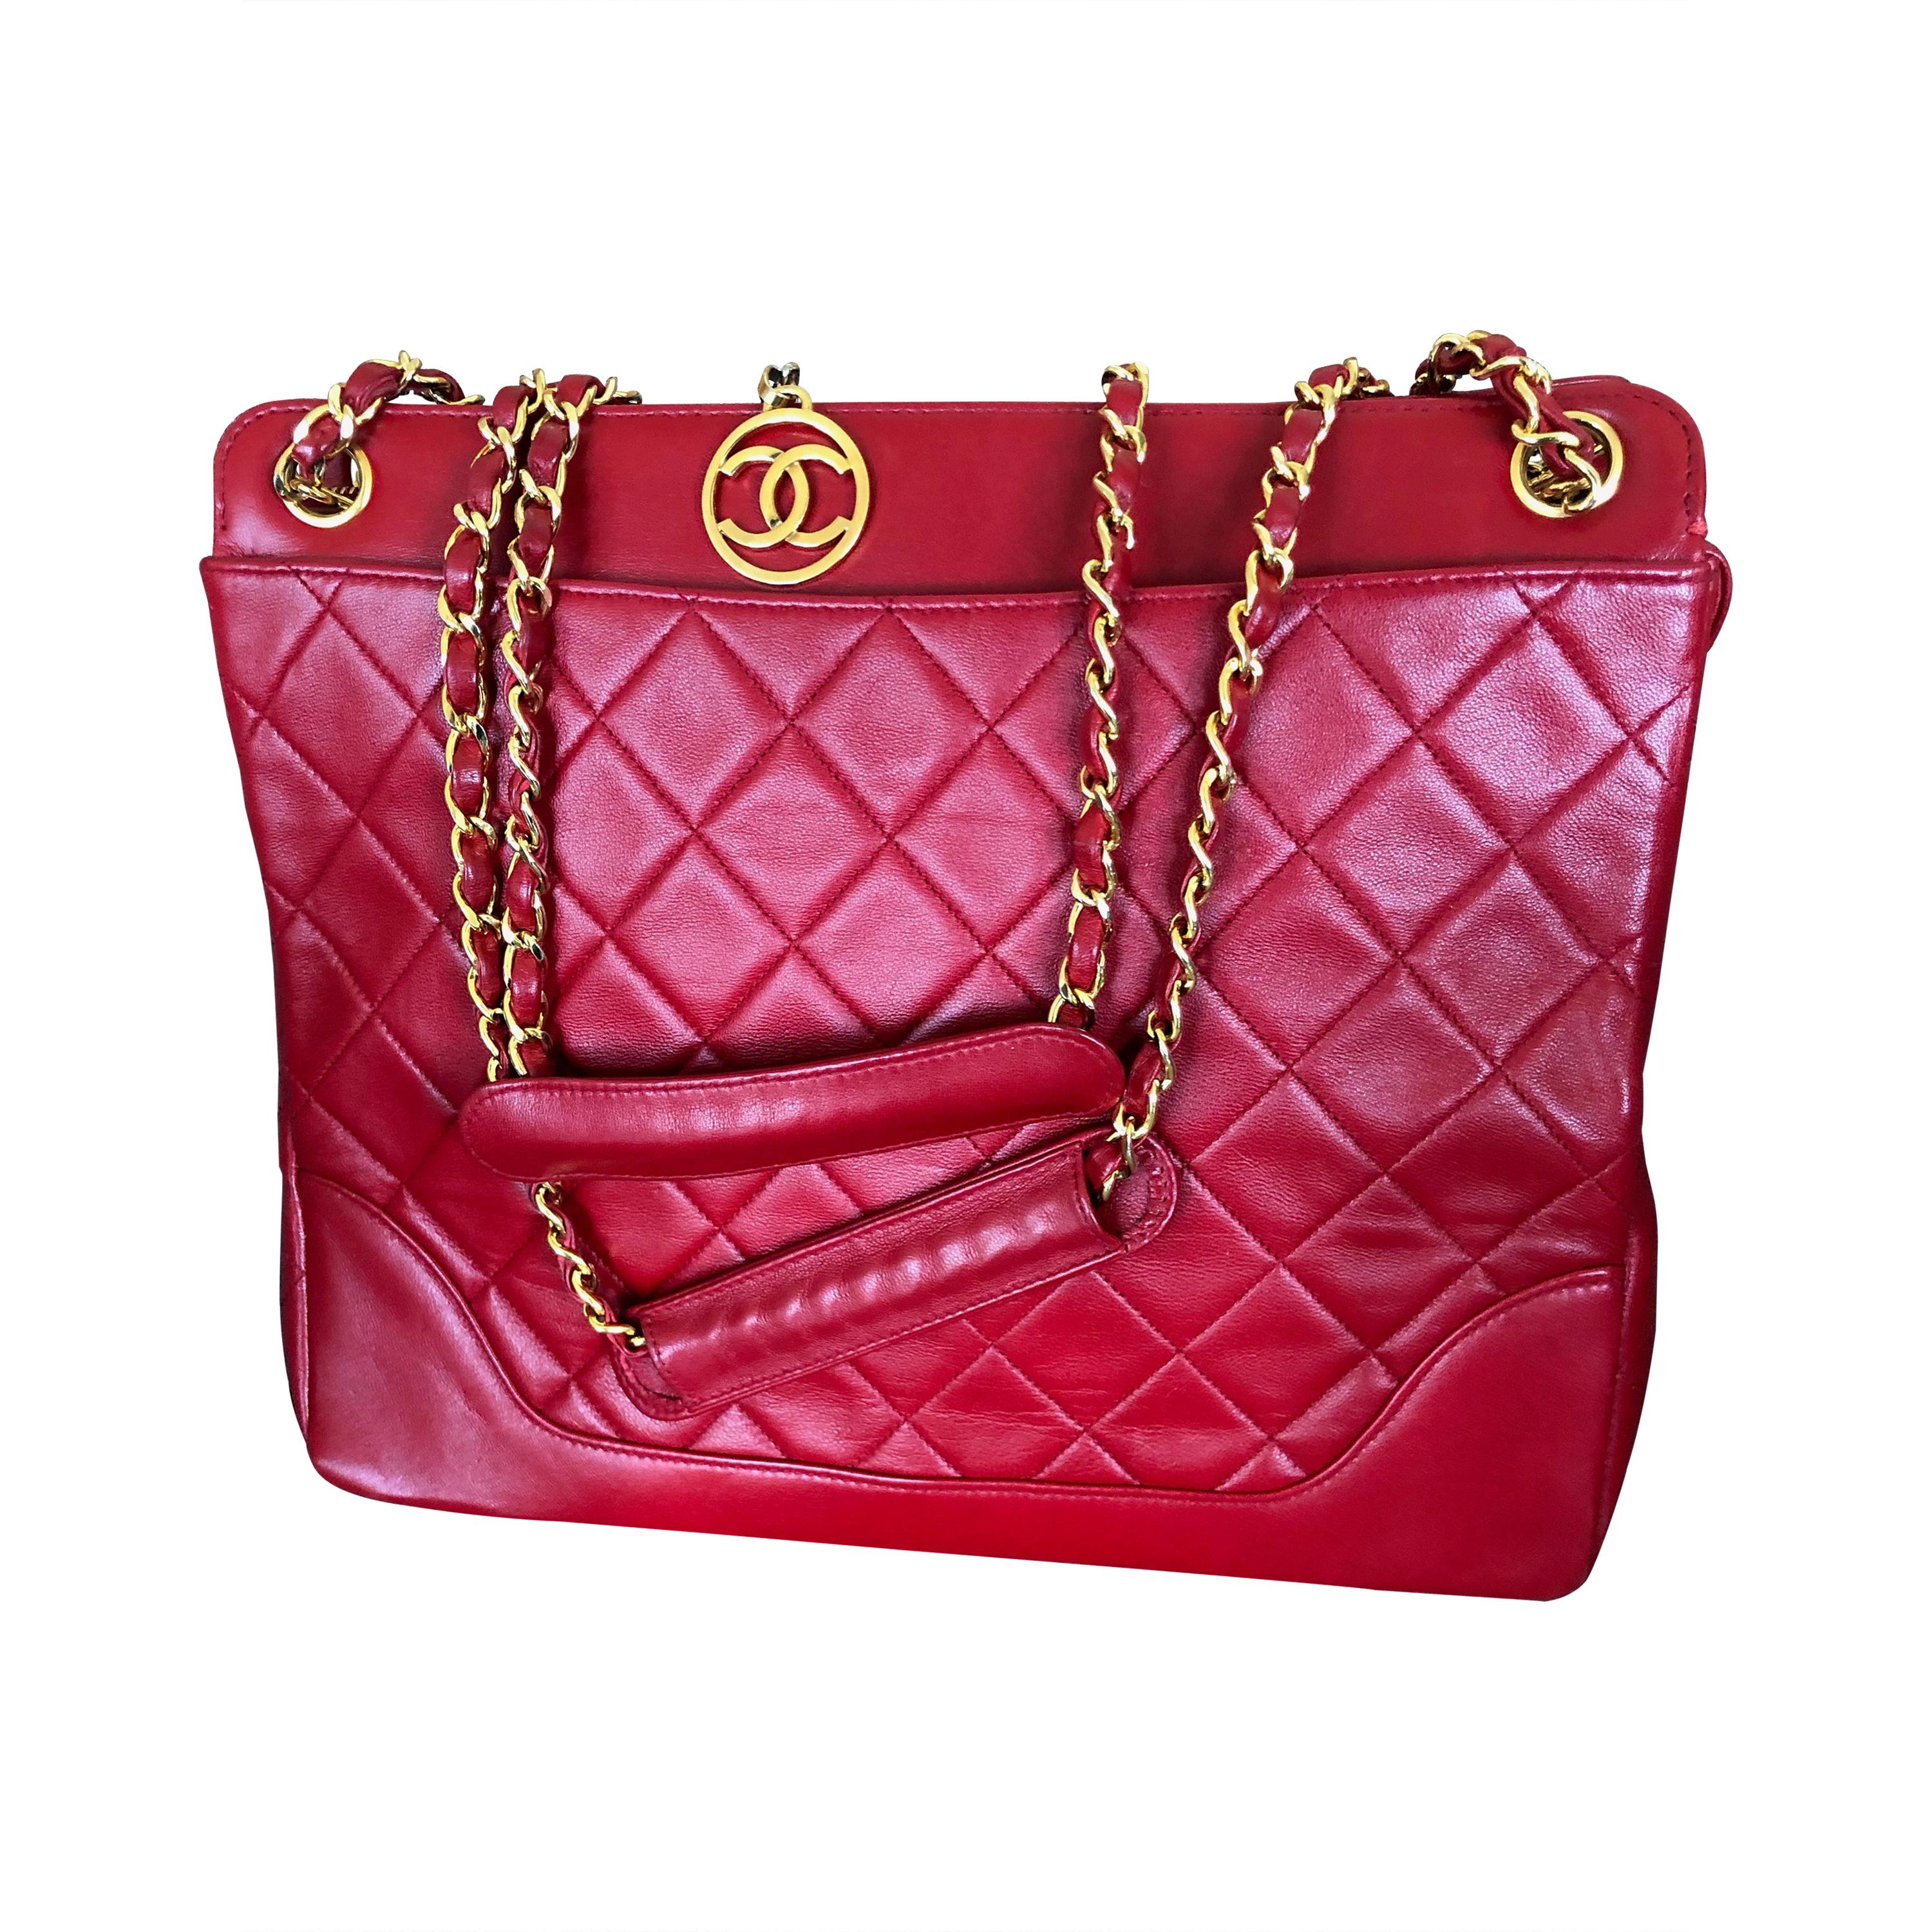 Chanel Tomato Red Vintage Lambskin Leather Quilted Tote Bag with Gold Hardware For Sale